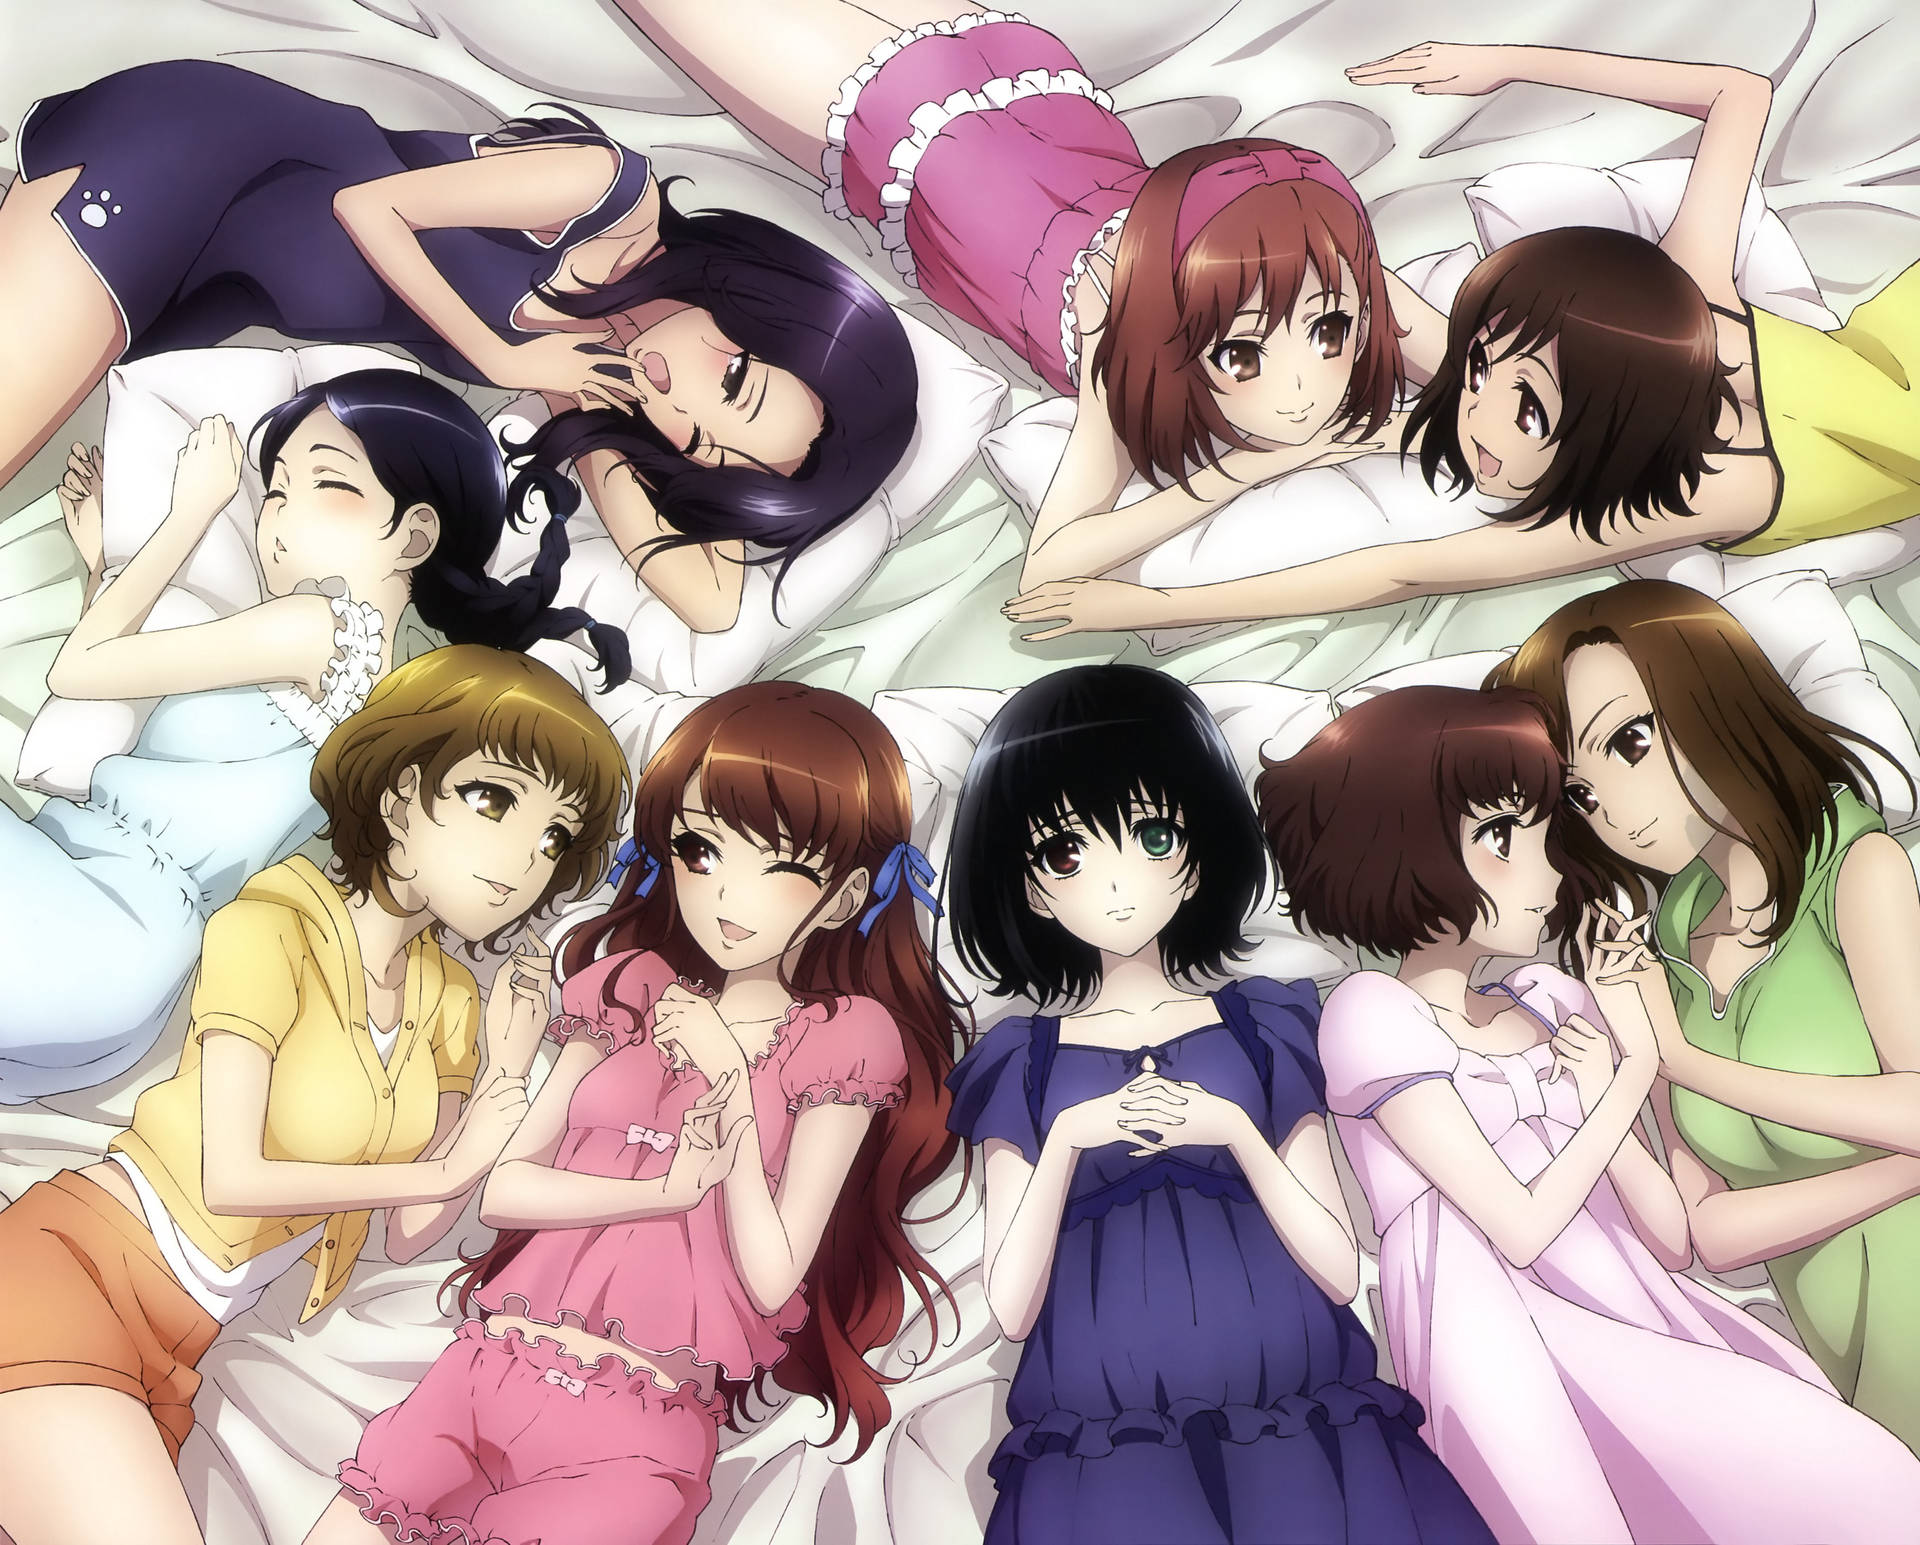 All Girls Characters In Another Anime Series Wallpaper